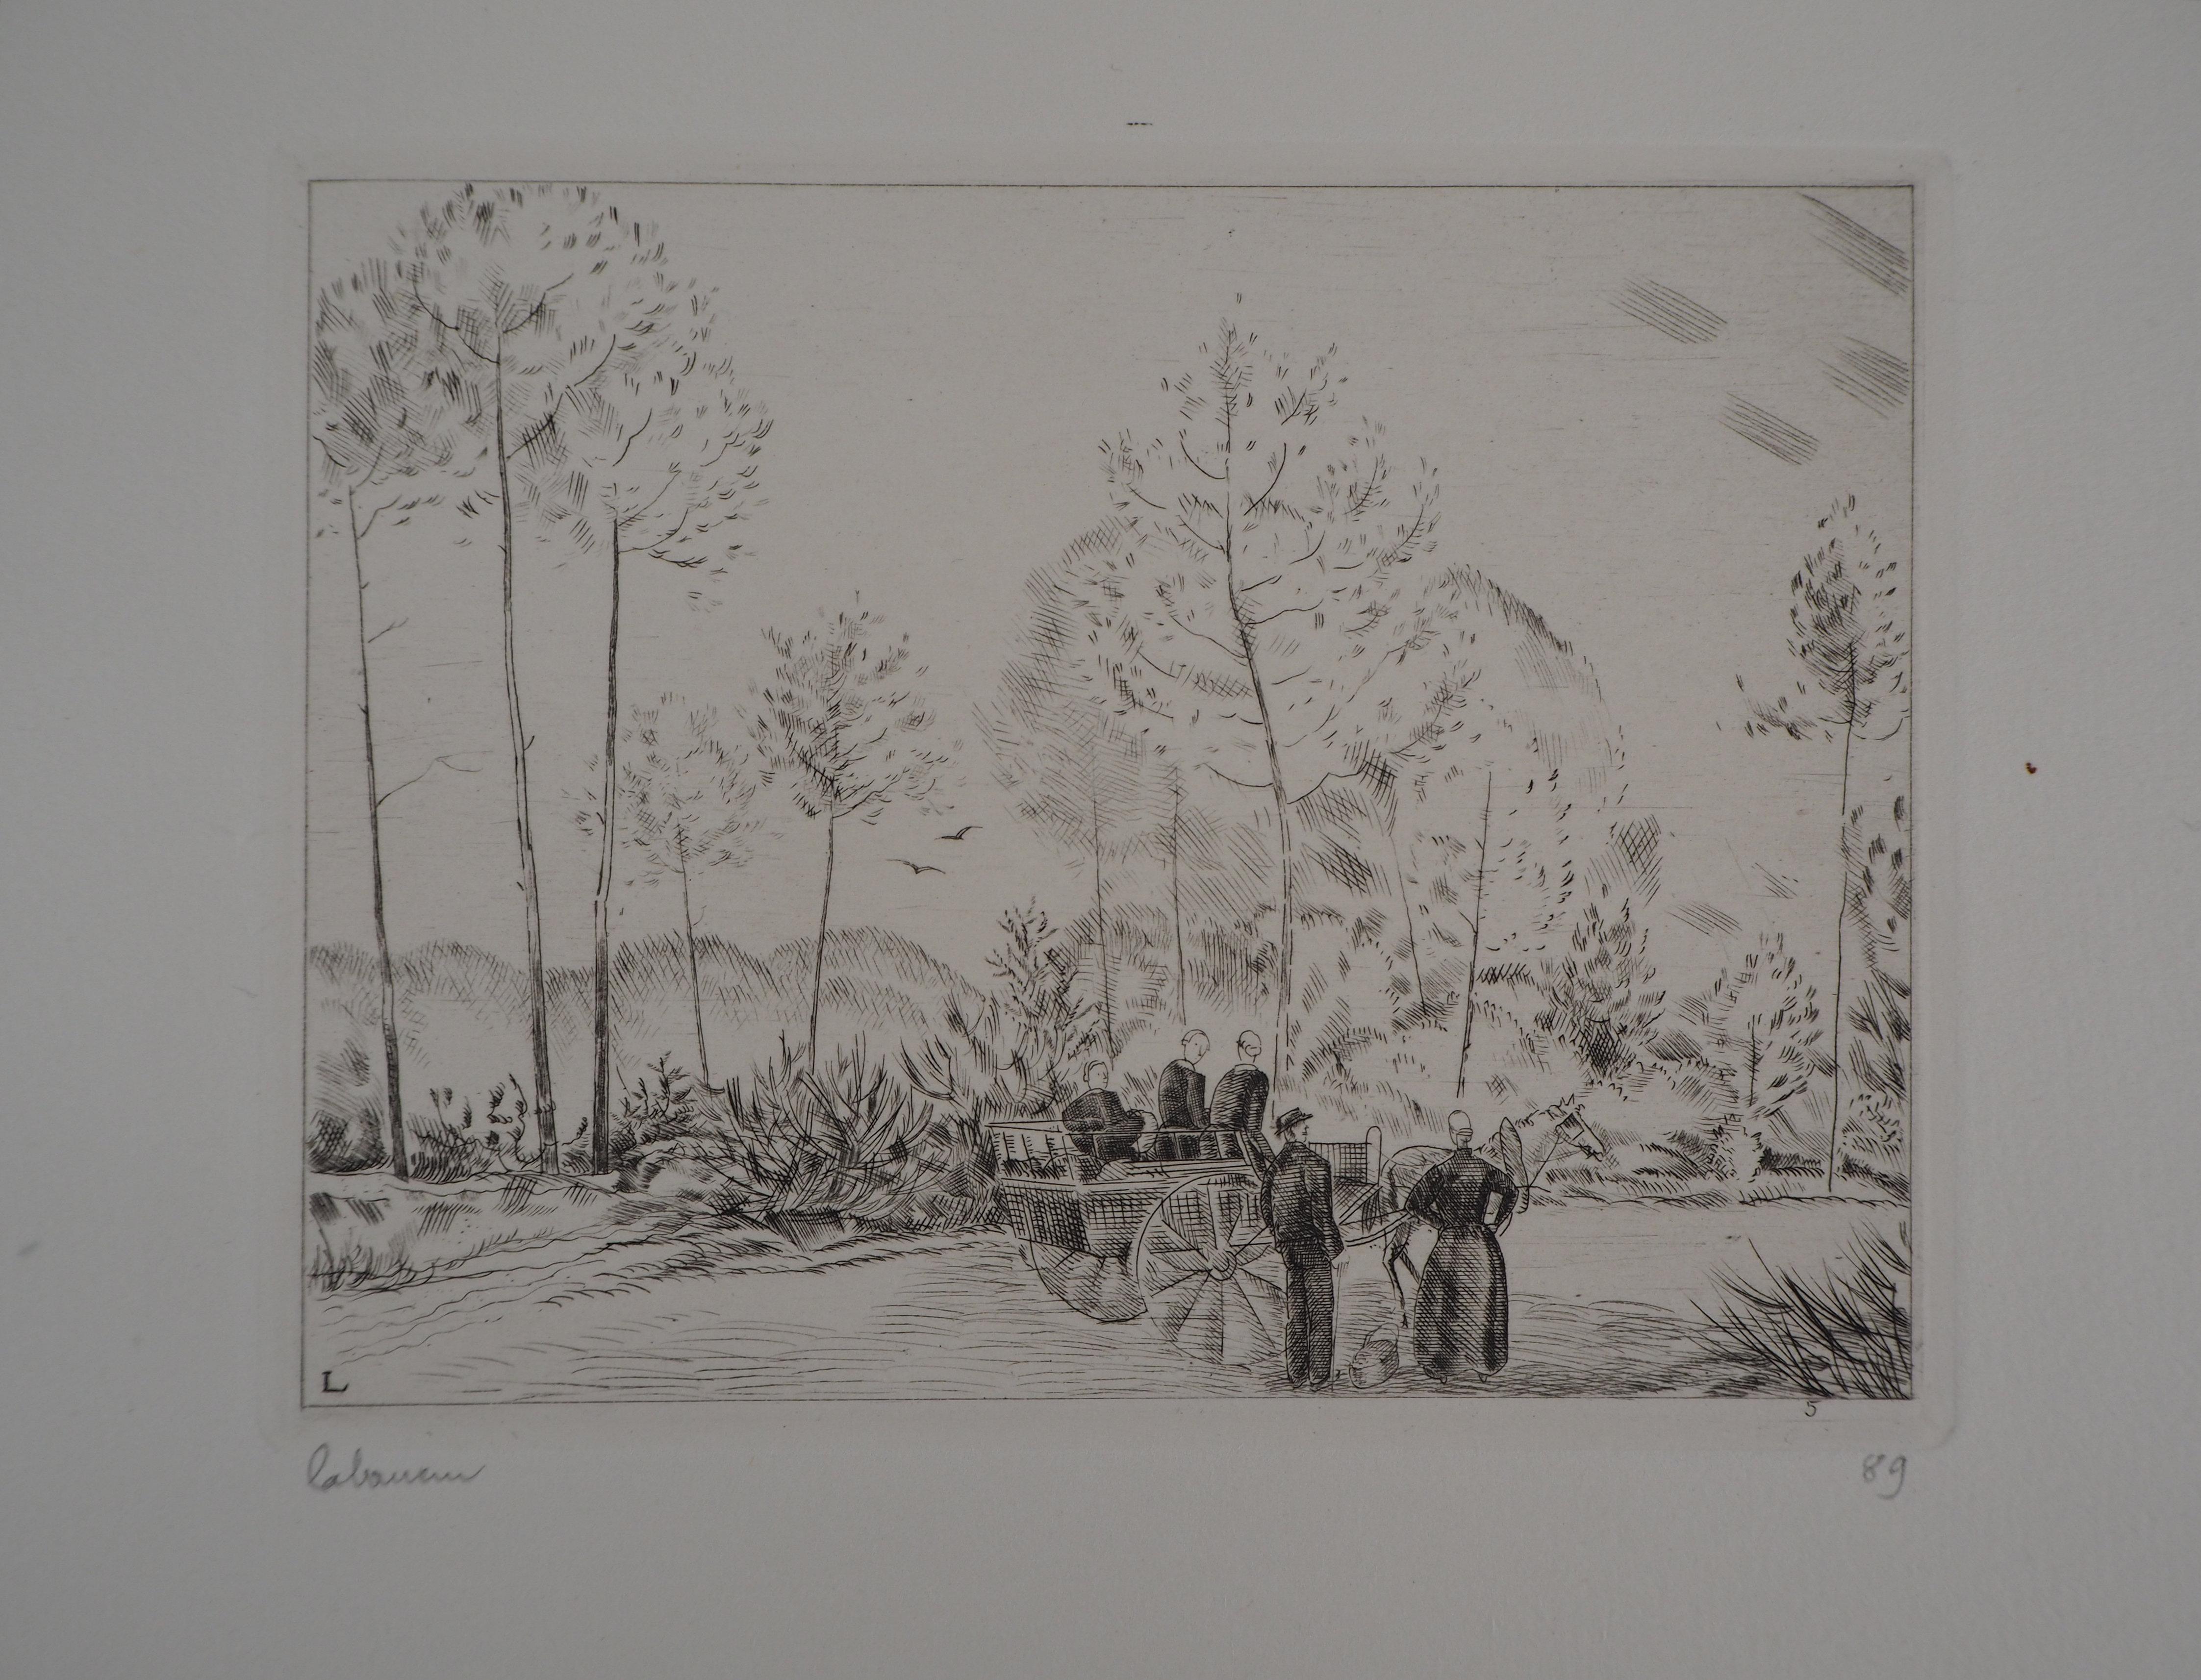 Jean-Emile Laboureur Landscape Print - The Road with Pine Trees - Handsigned Etching, Limited /150